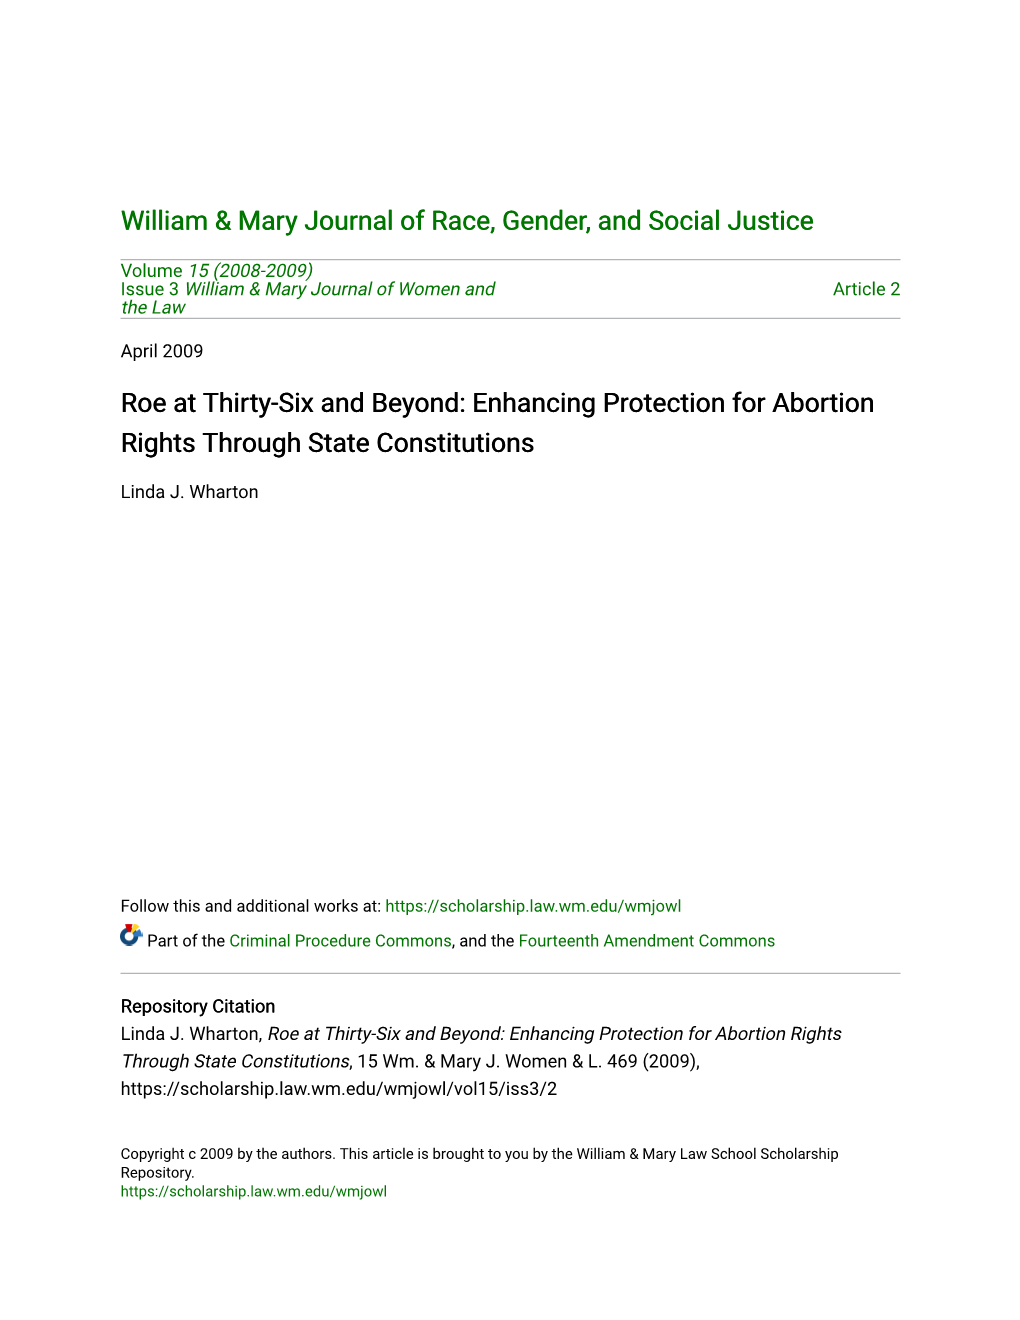 Enhancing Protection for Abortion Rights Through State Constitutions